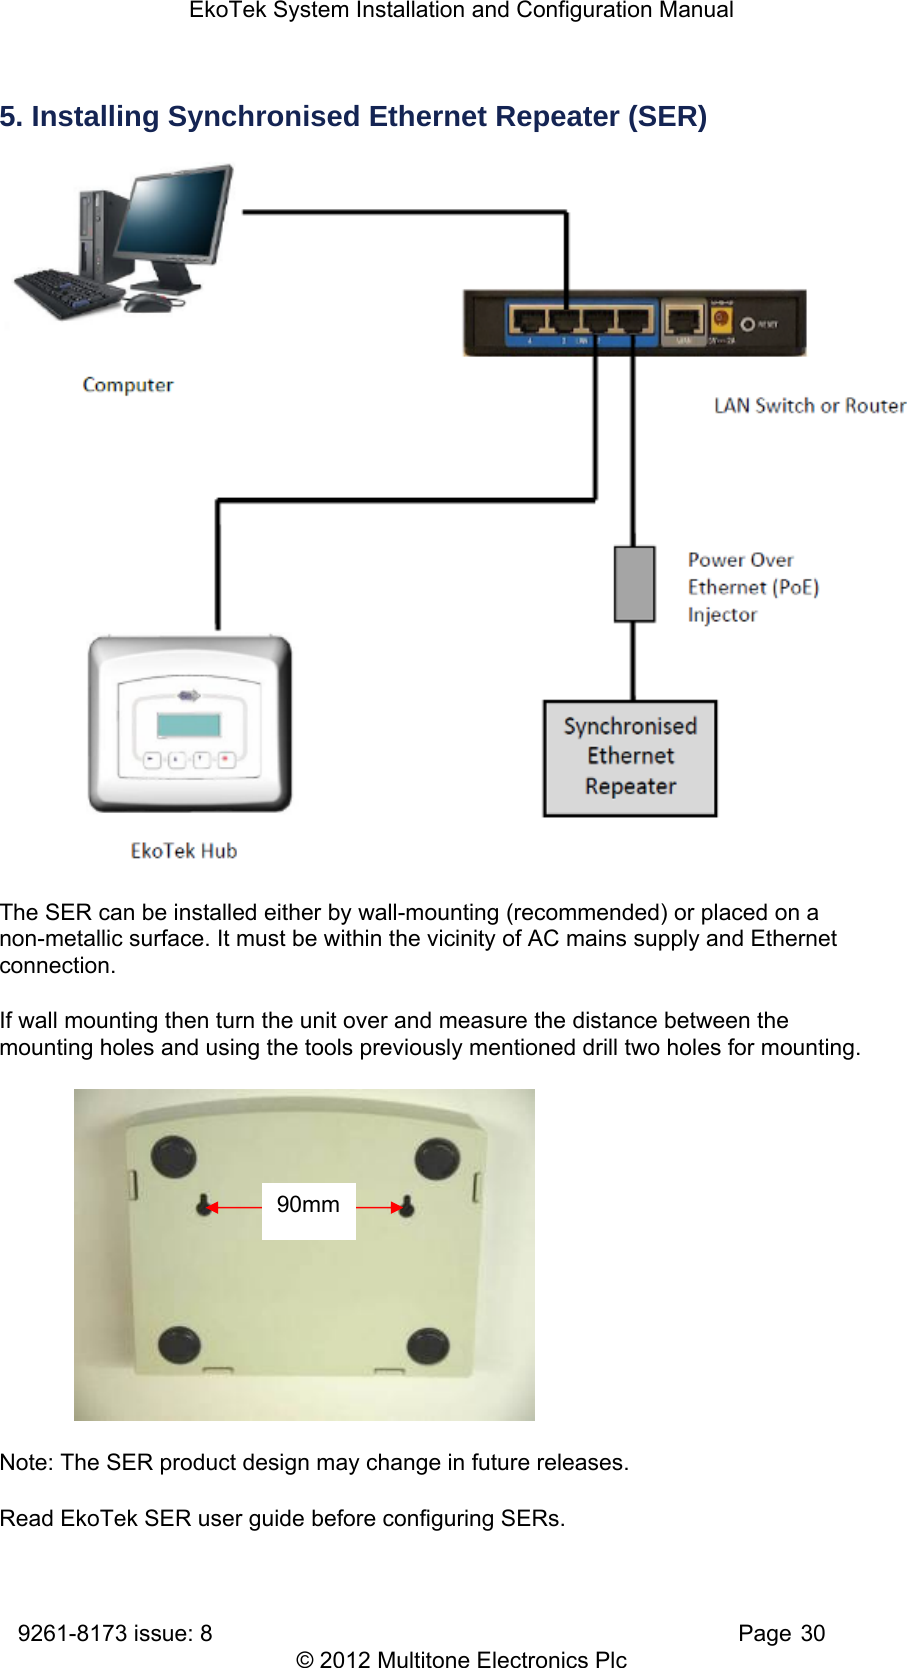 EkoTek System Installation and Configuration Manual 9261-8173 issue: 8   Page 30 © 2012 Multitone Electronics Plc 5. Installing Synchronised Ethernet Repeater (SER)  The SER can be installed either by wall-mounting (recommended) or placed on a non-metallic surface. It must be within the vicinity of AC mains supply and Ethernet connection. If wall mounting then turn the unit over and measure the distance between the mounting holes and using the tools previously mentioned drill two holes for mounting.            Note: The SER product design may change in future releases. Read EkoTek SER user guide before configuring SERs. 90mm 